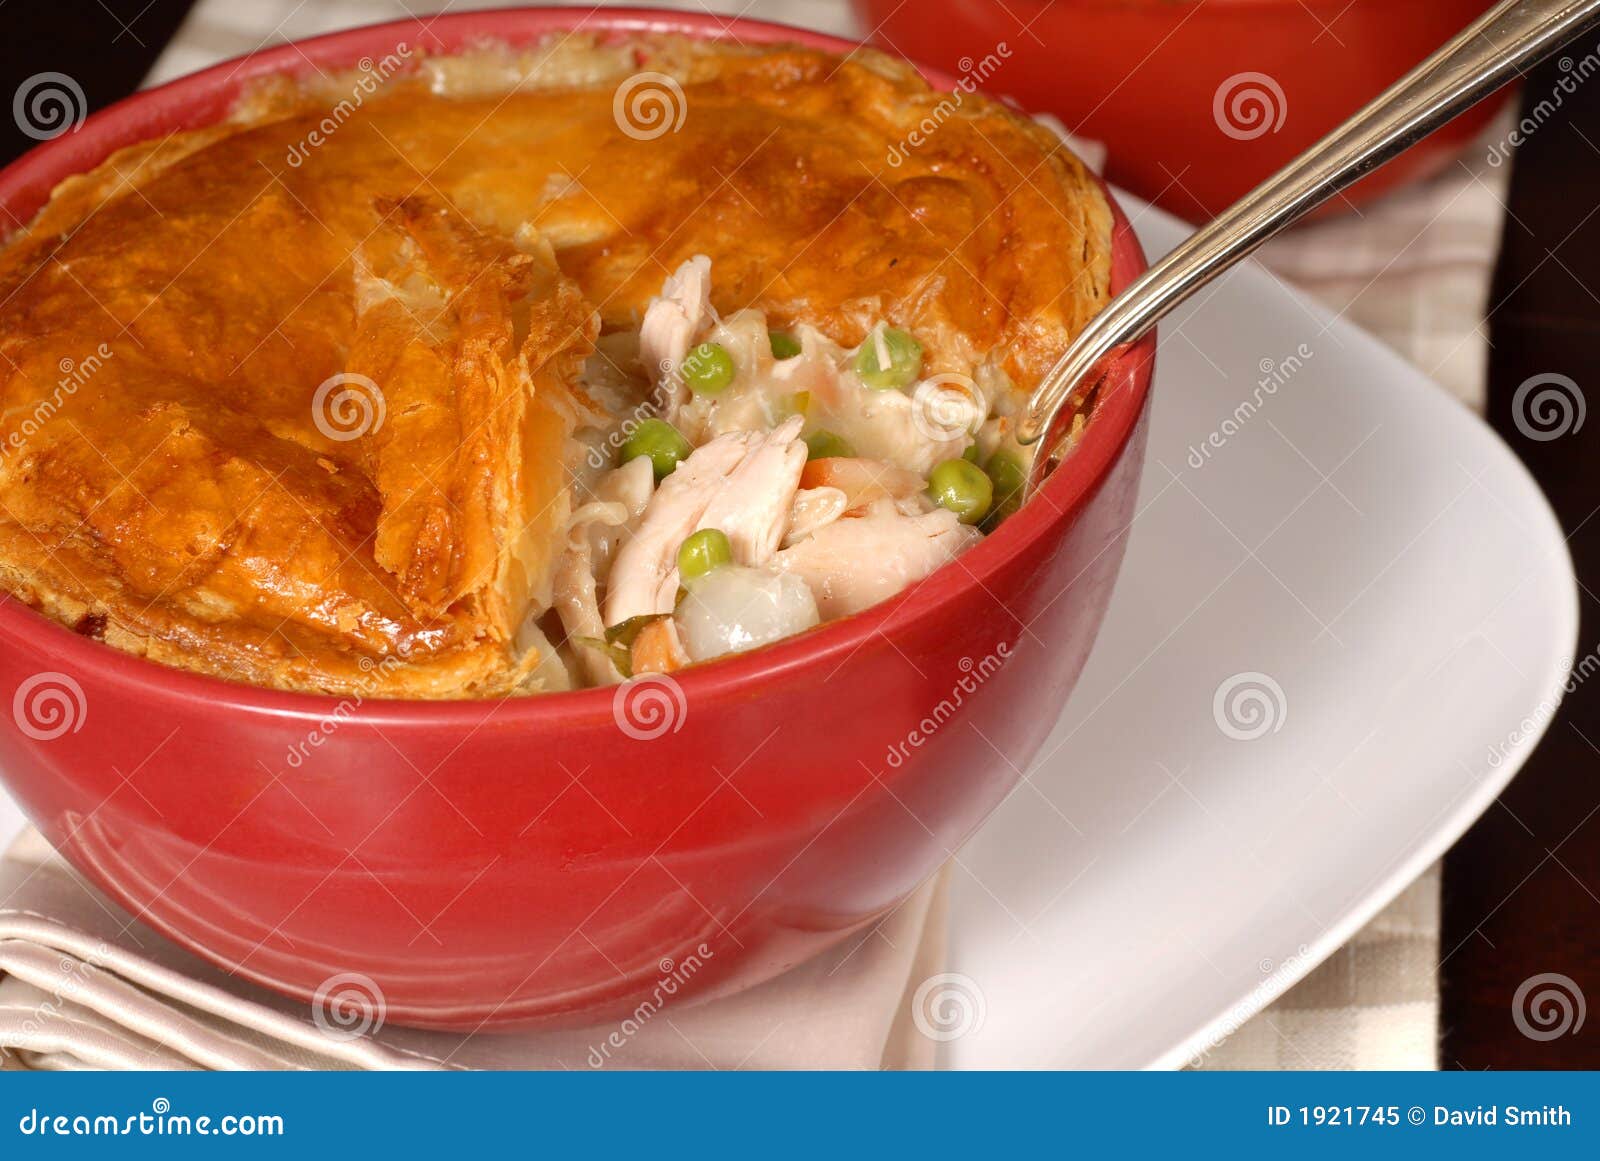 chicken pot pie with flaky pastry crust